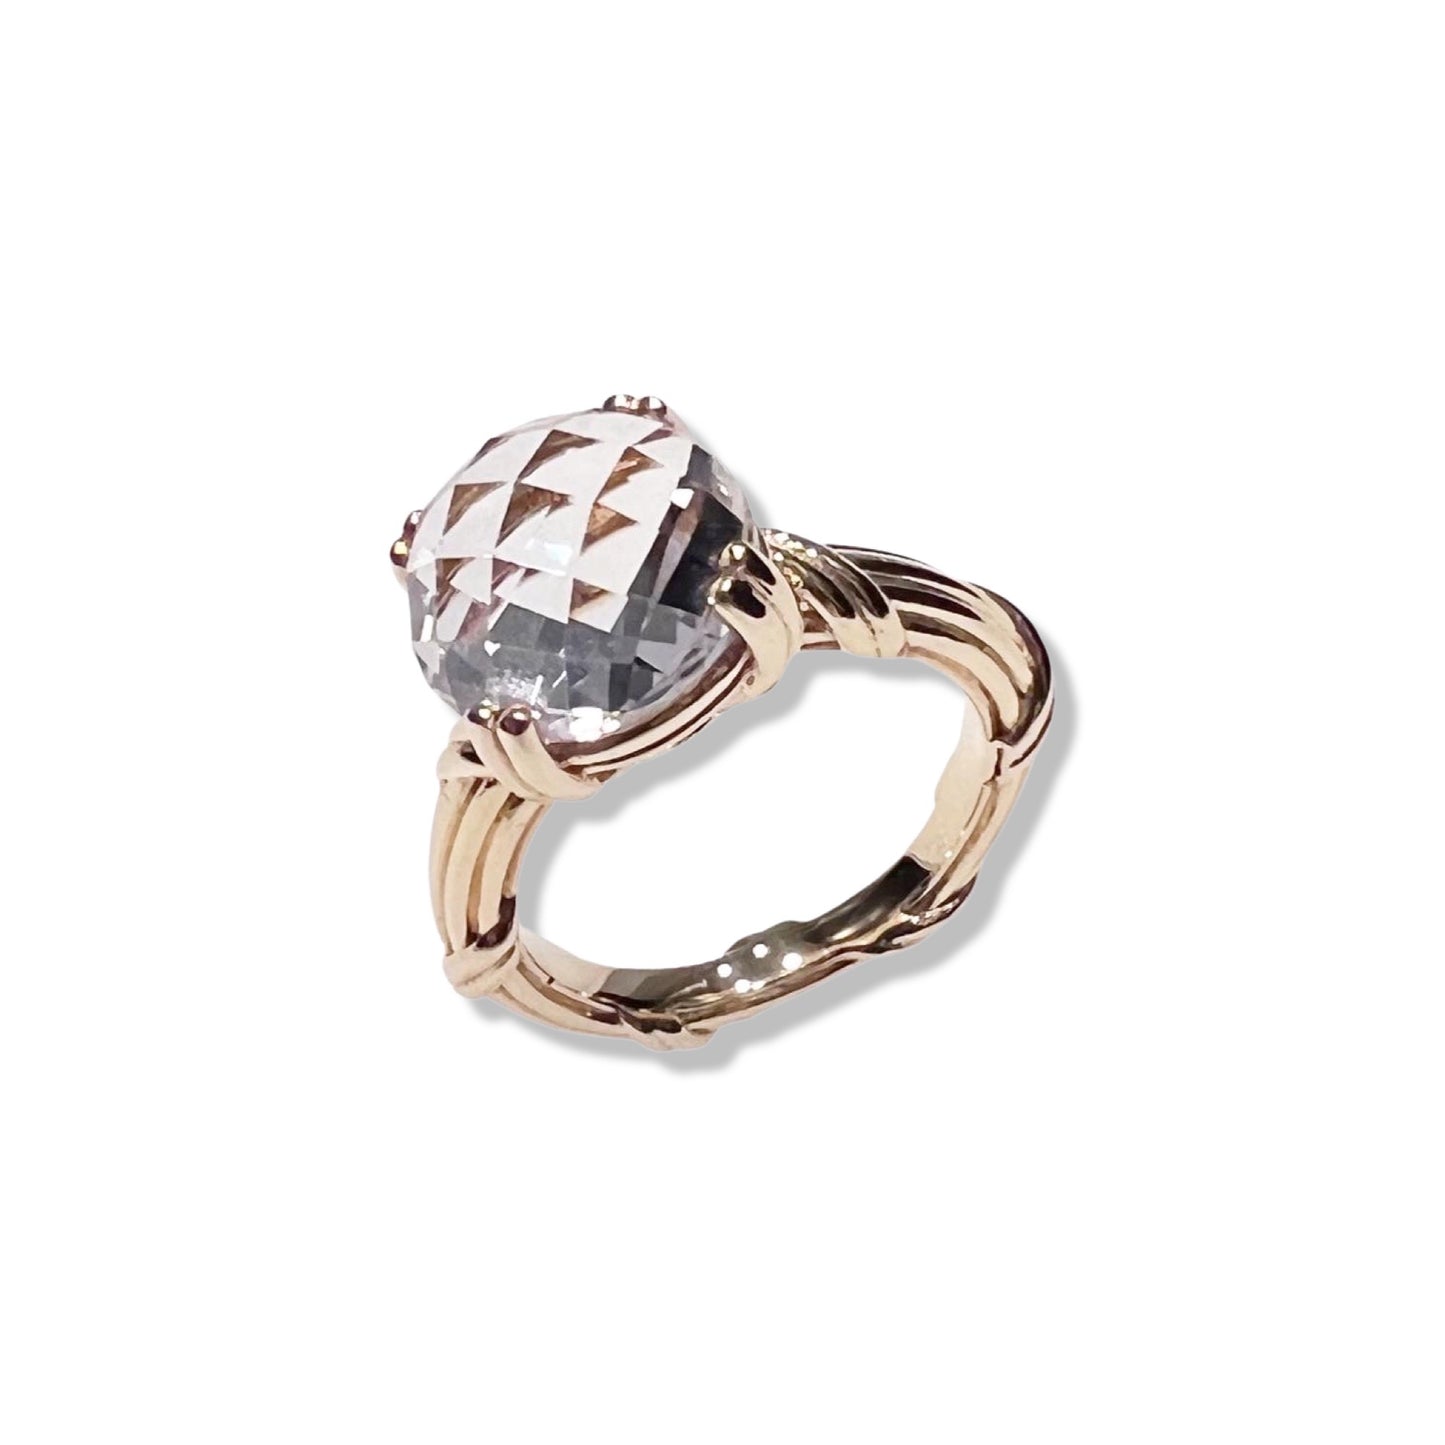 Fantasies Rock Crystal Cocktail Ring in 18K yellow gold 12mm